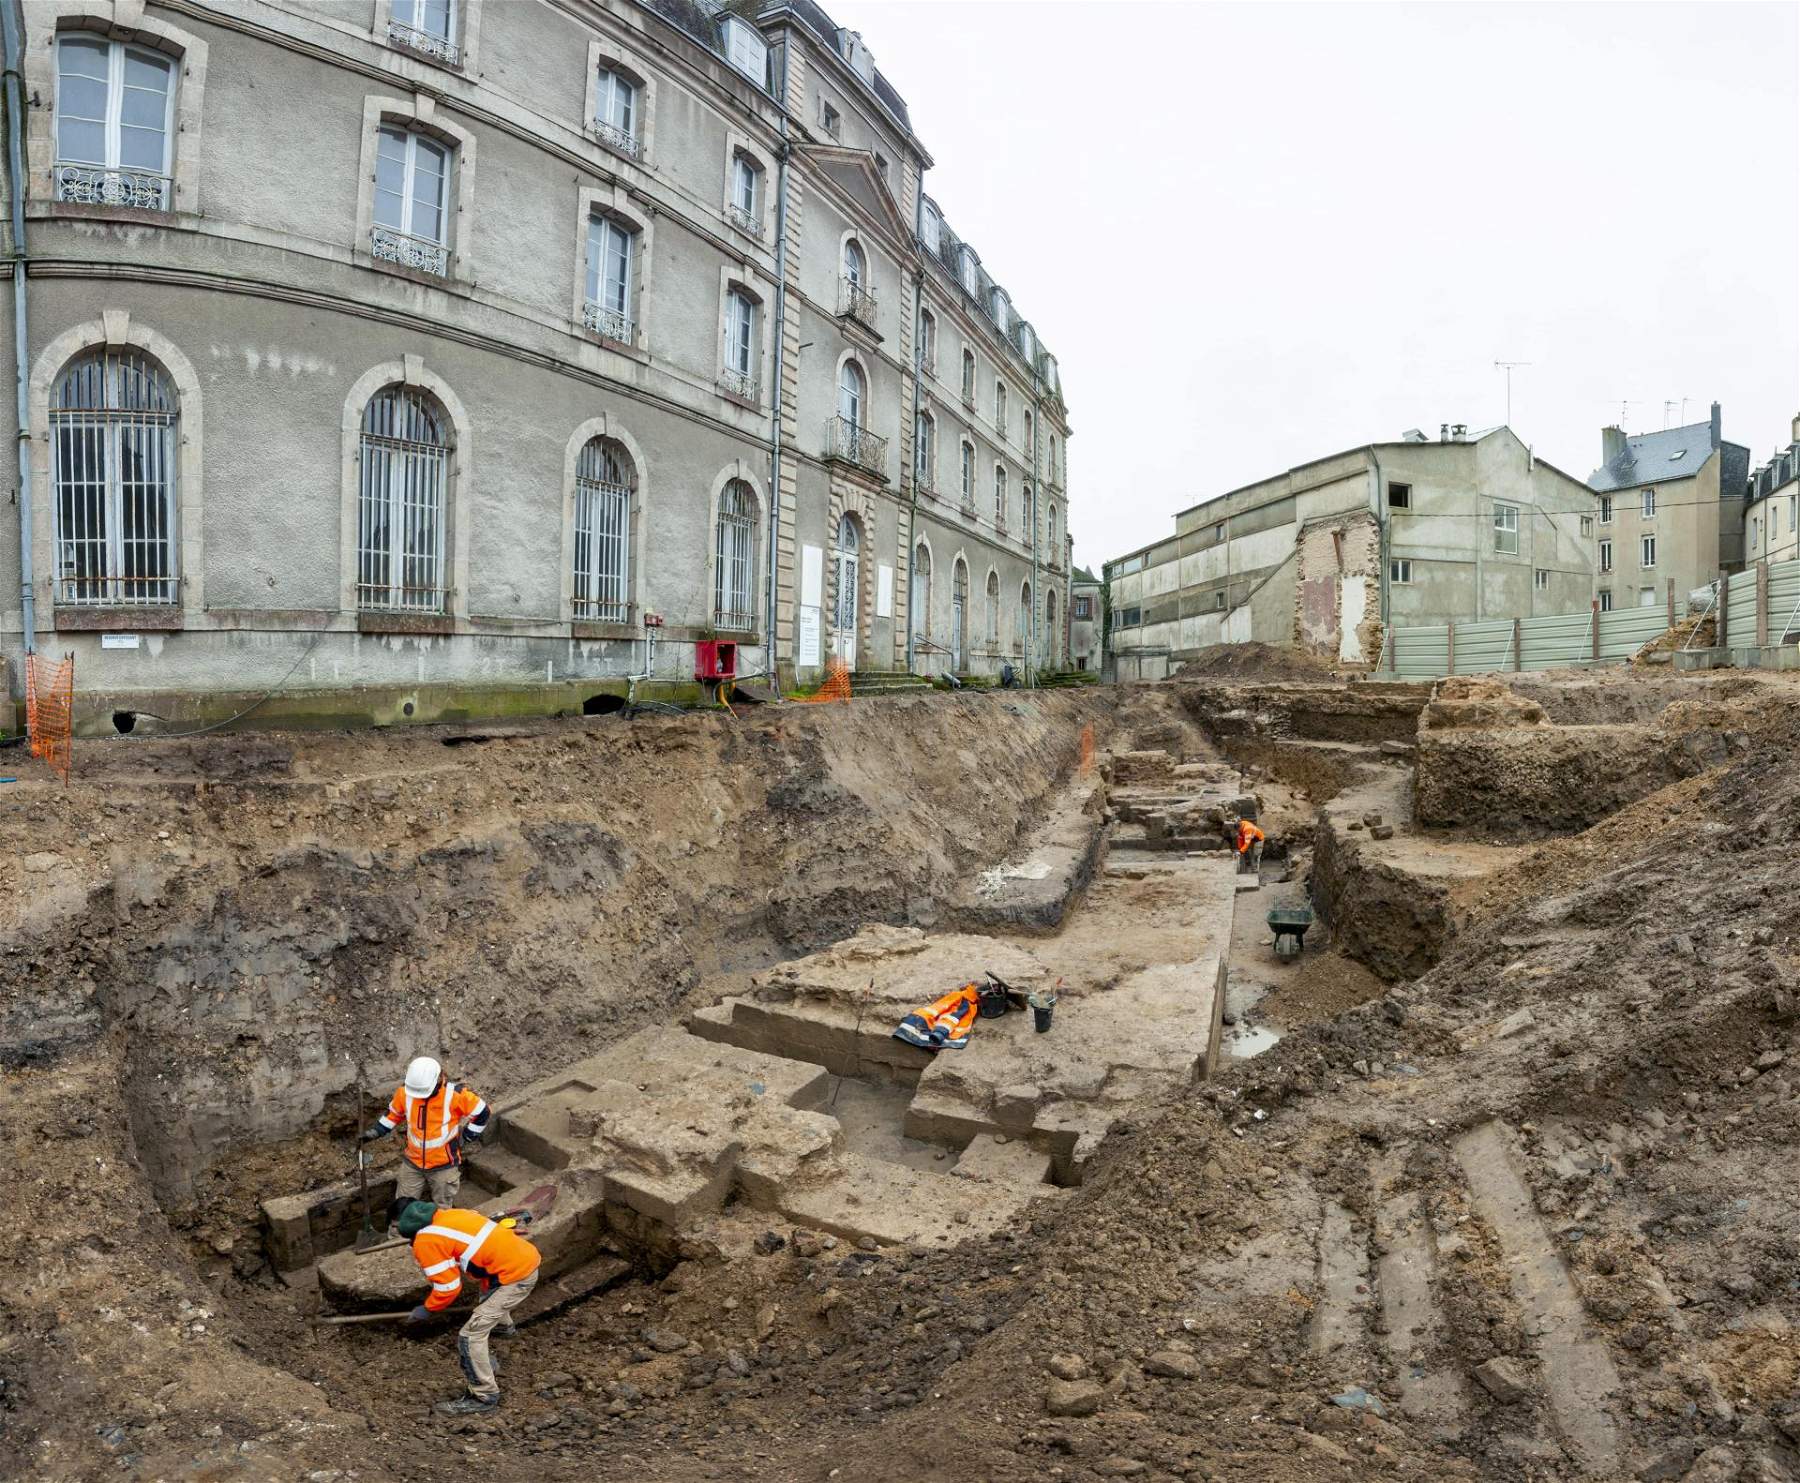 France, archaeologists in Vannes discover medieval castle under 18th century house